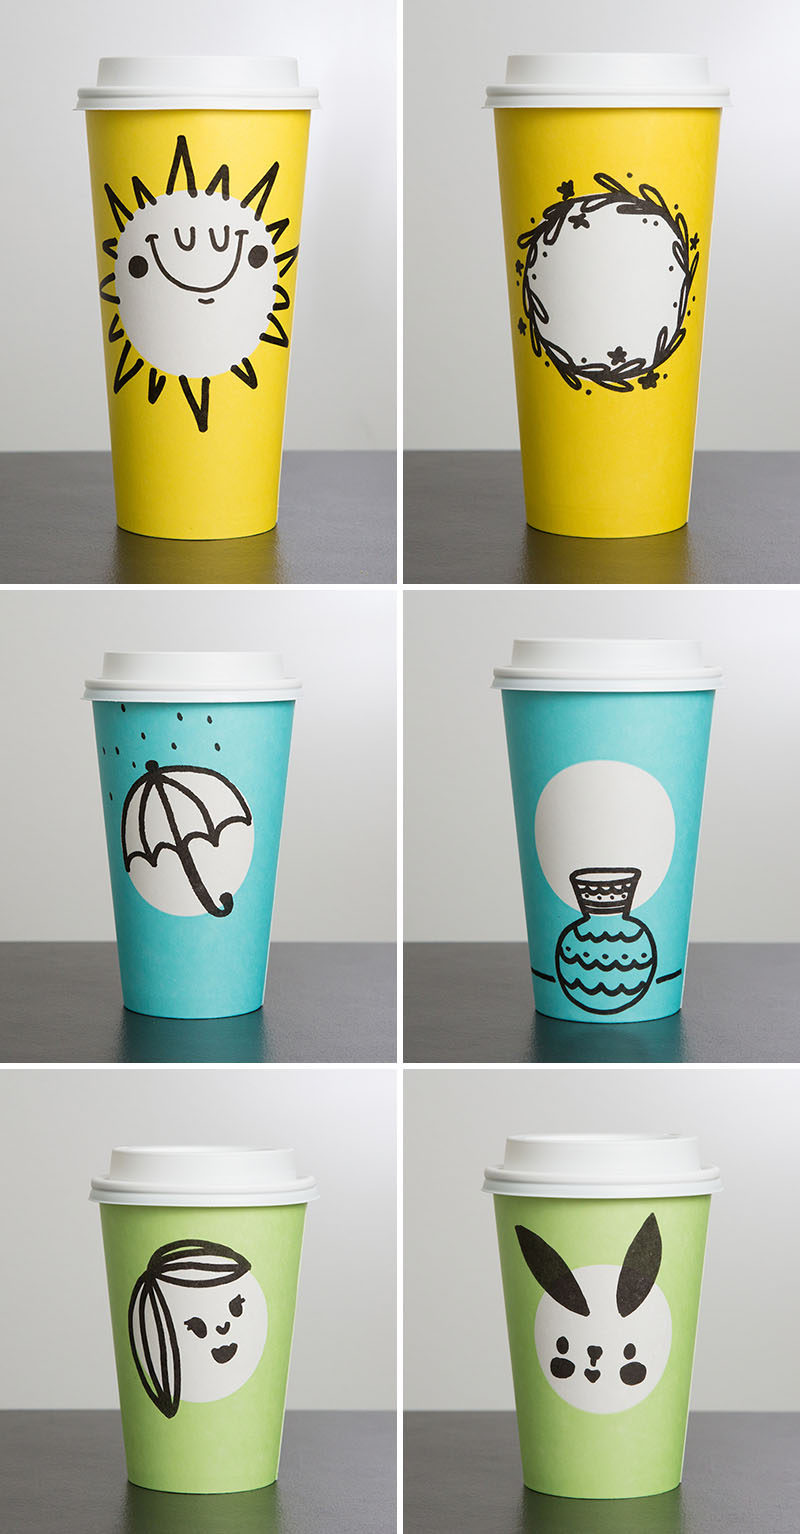 This spring, Starbucks will be unveiling their latest cup designs, a minimalist spring theme cup in pastel colors with a simple white circle so that you can draw your own design. Others will be the same new design but will come with hand-drawn designs on them already.